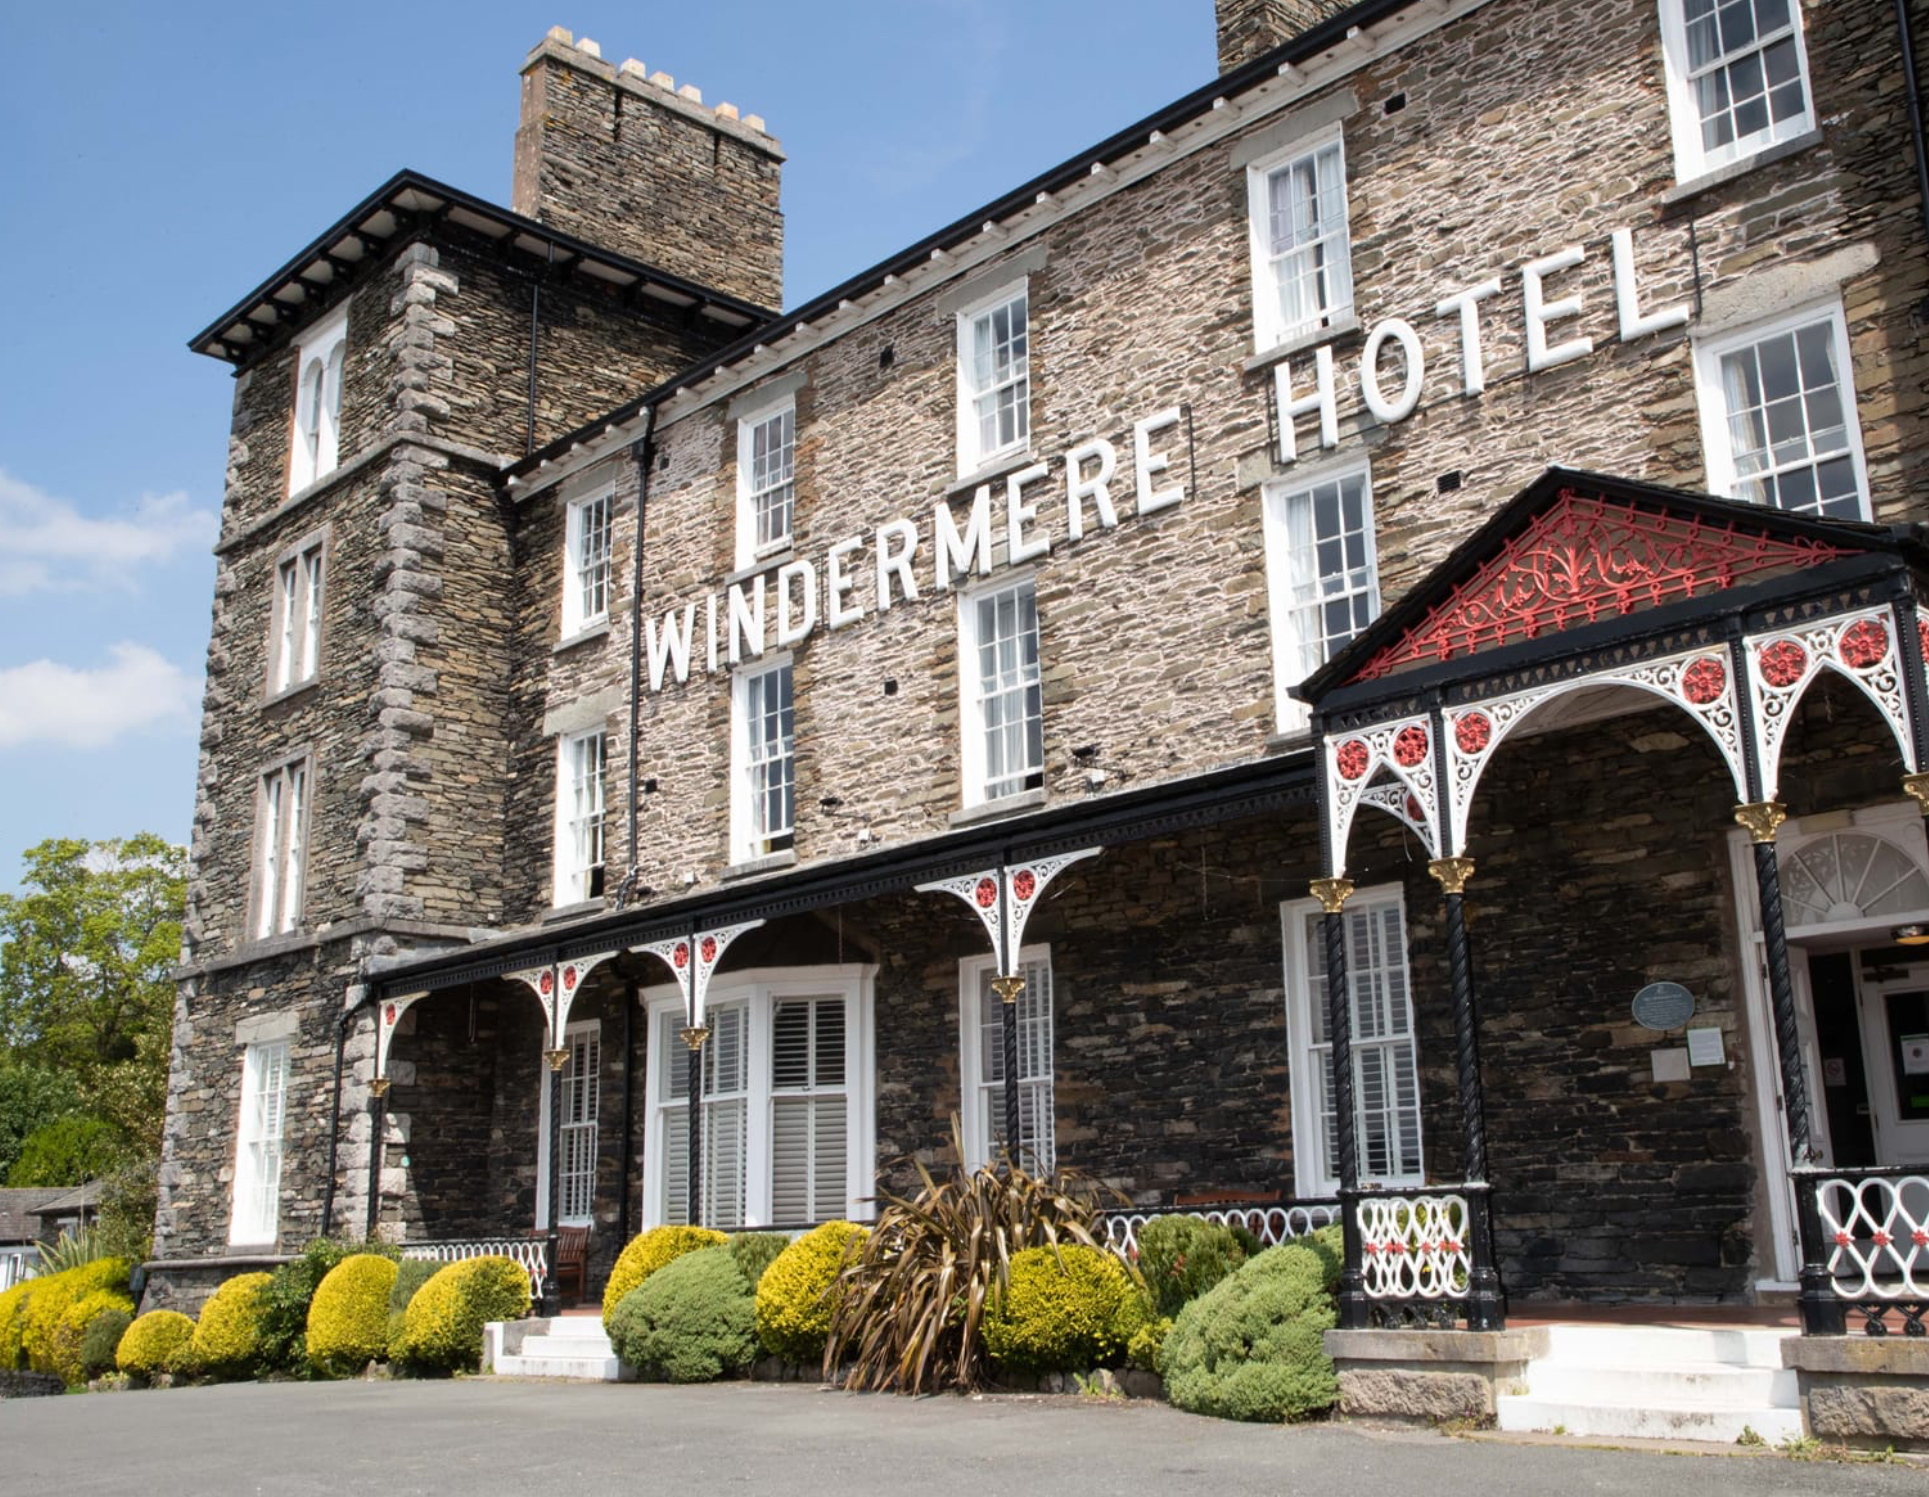 The Windermere Hotel Lake District1